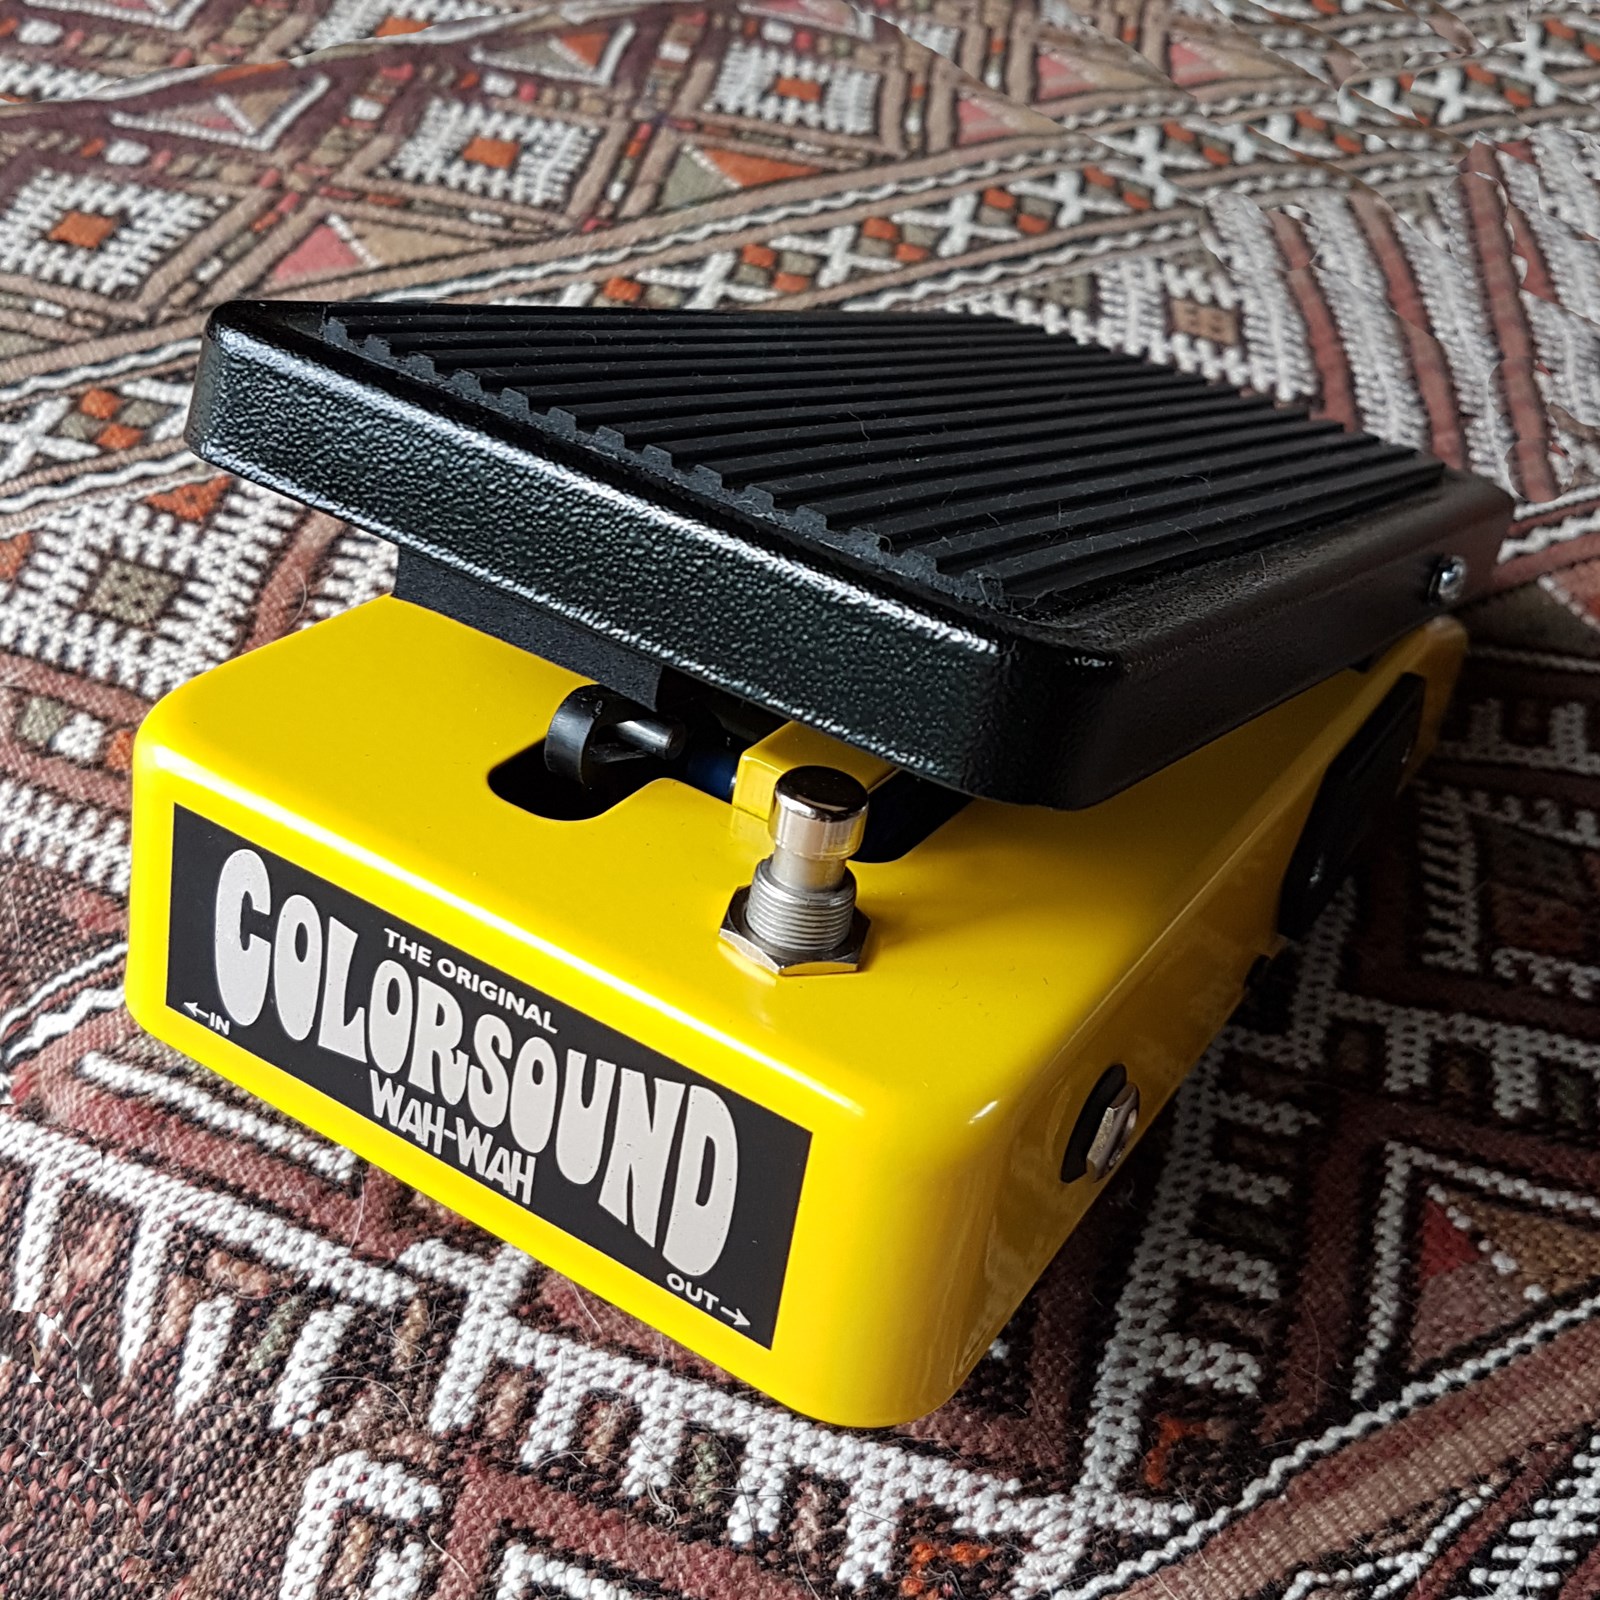 The Inductorless Wah-Wah by jake rothman